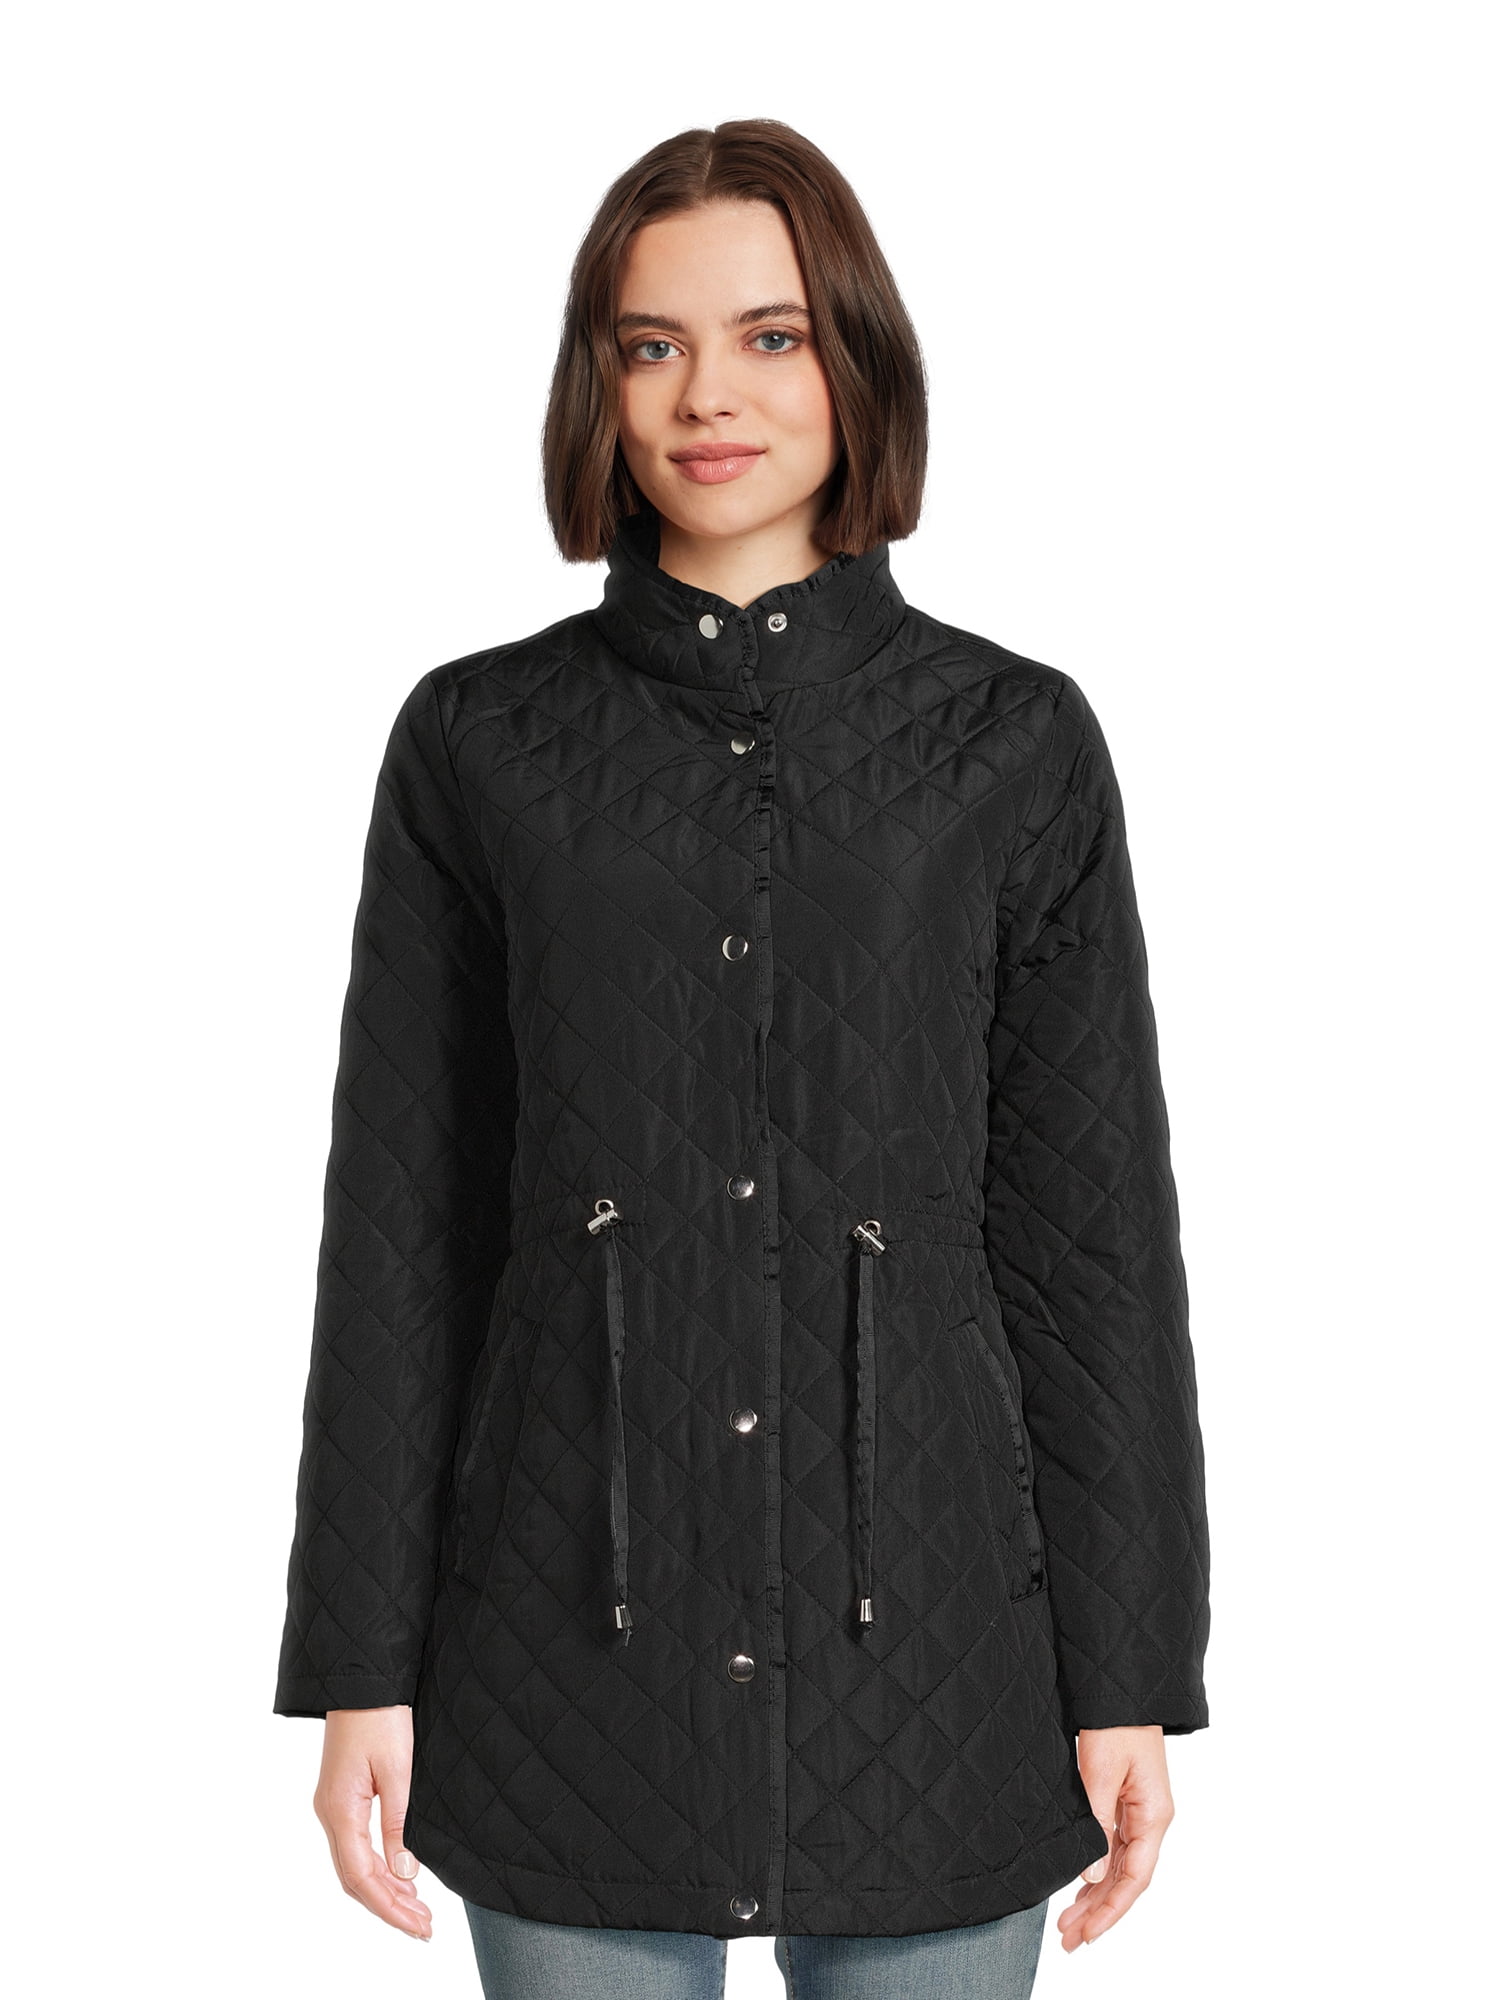 Jason Maxwell Women’s Midweight Pongee Quilted Jacket, Sizes S-XL ...